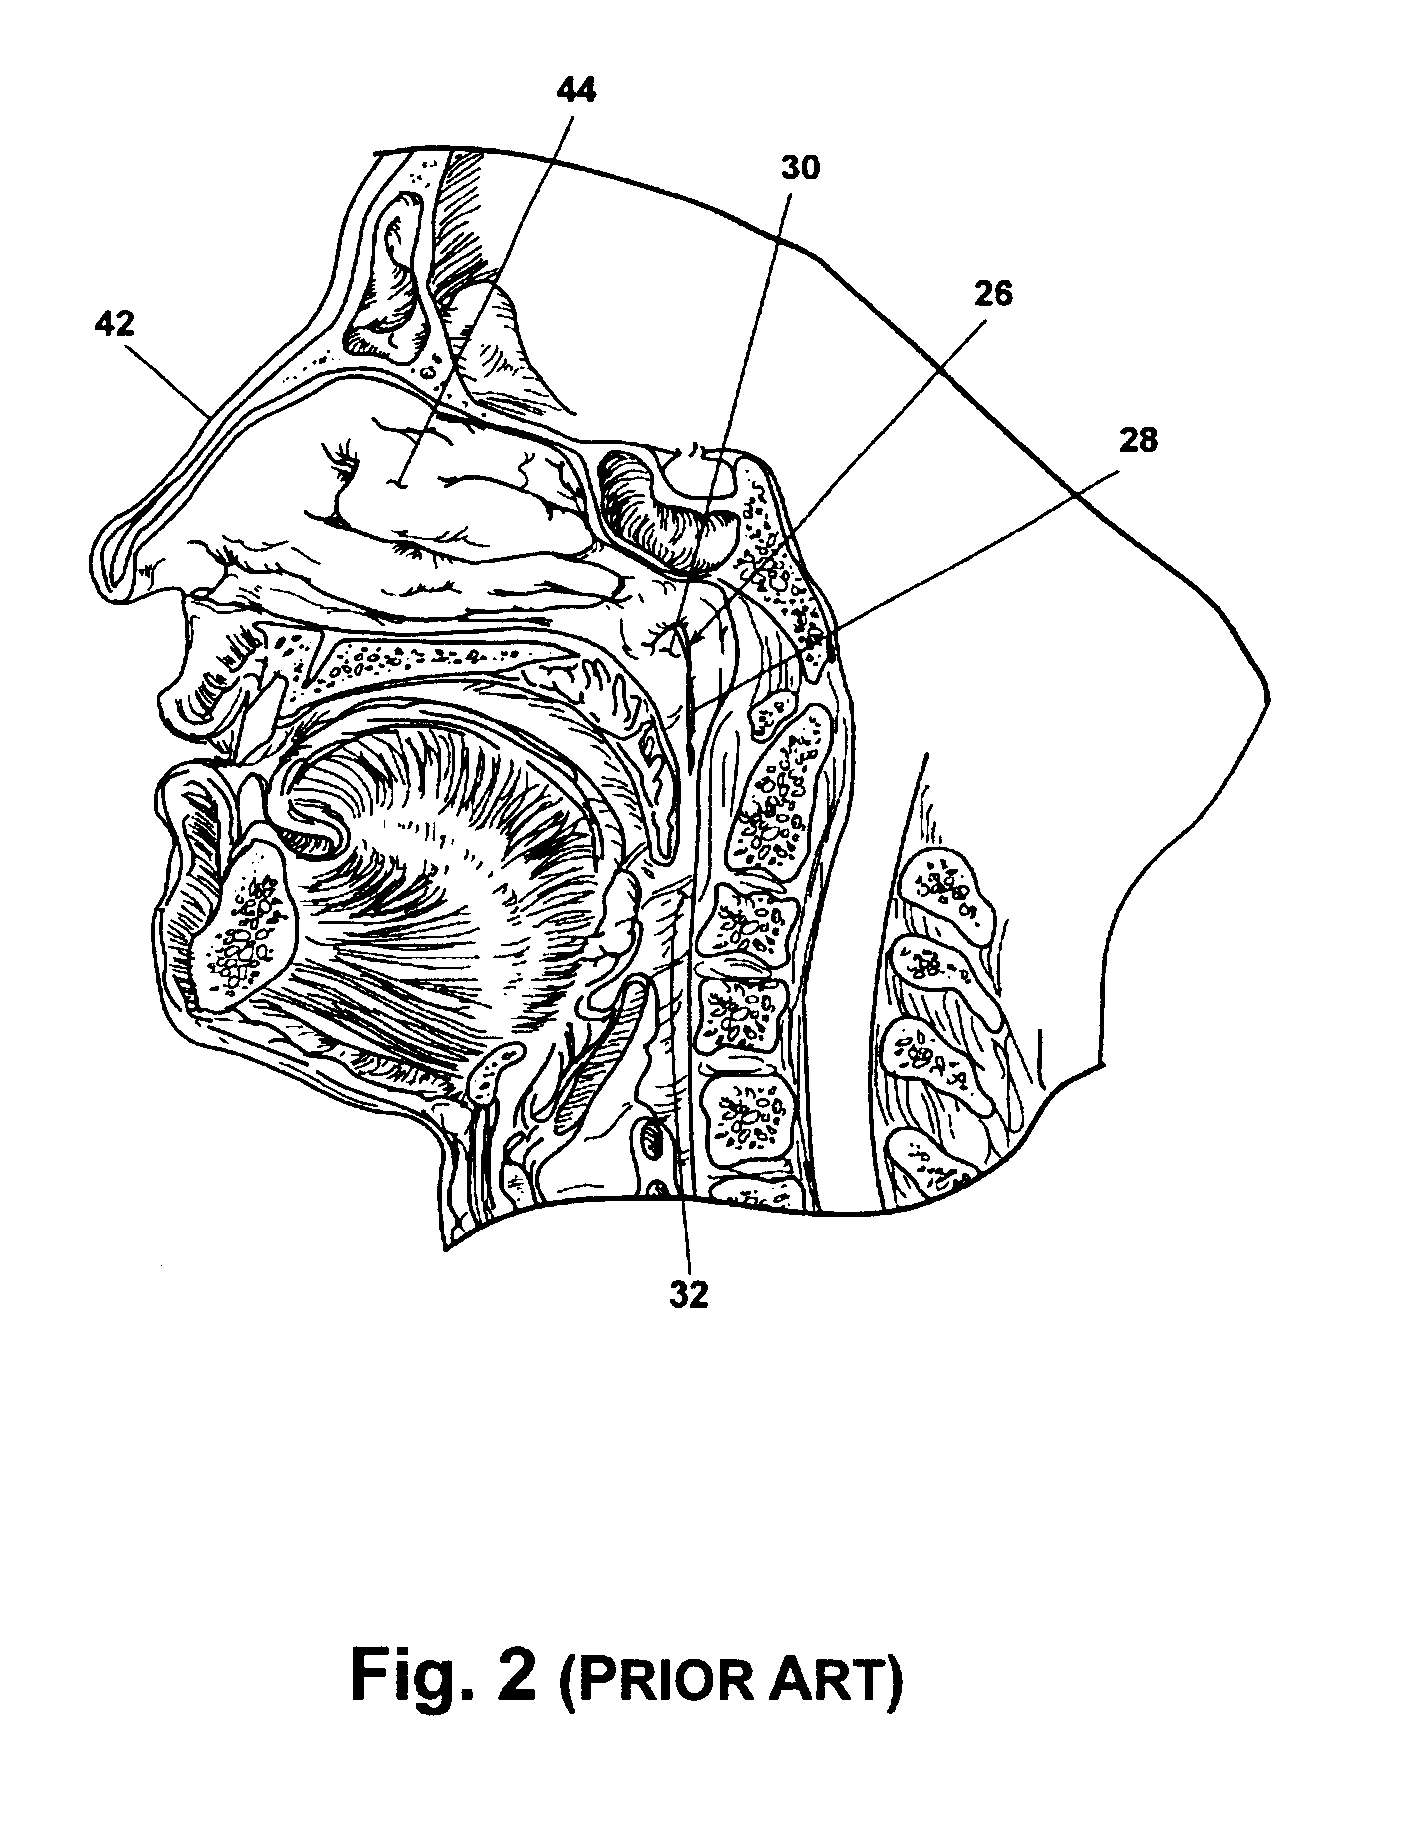 Method and apparatus for relieving fluid build-up in the middle ear